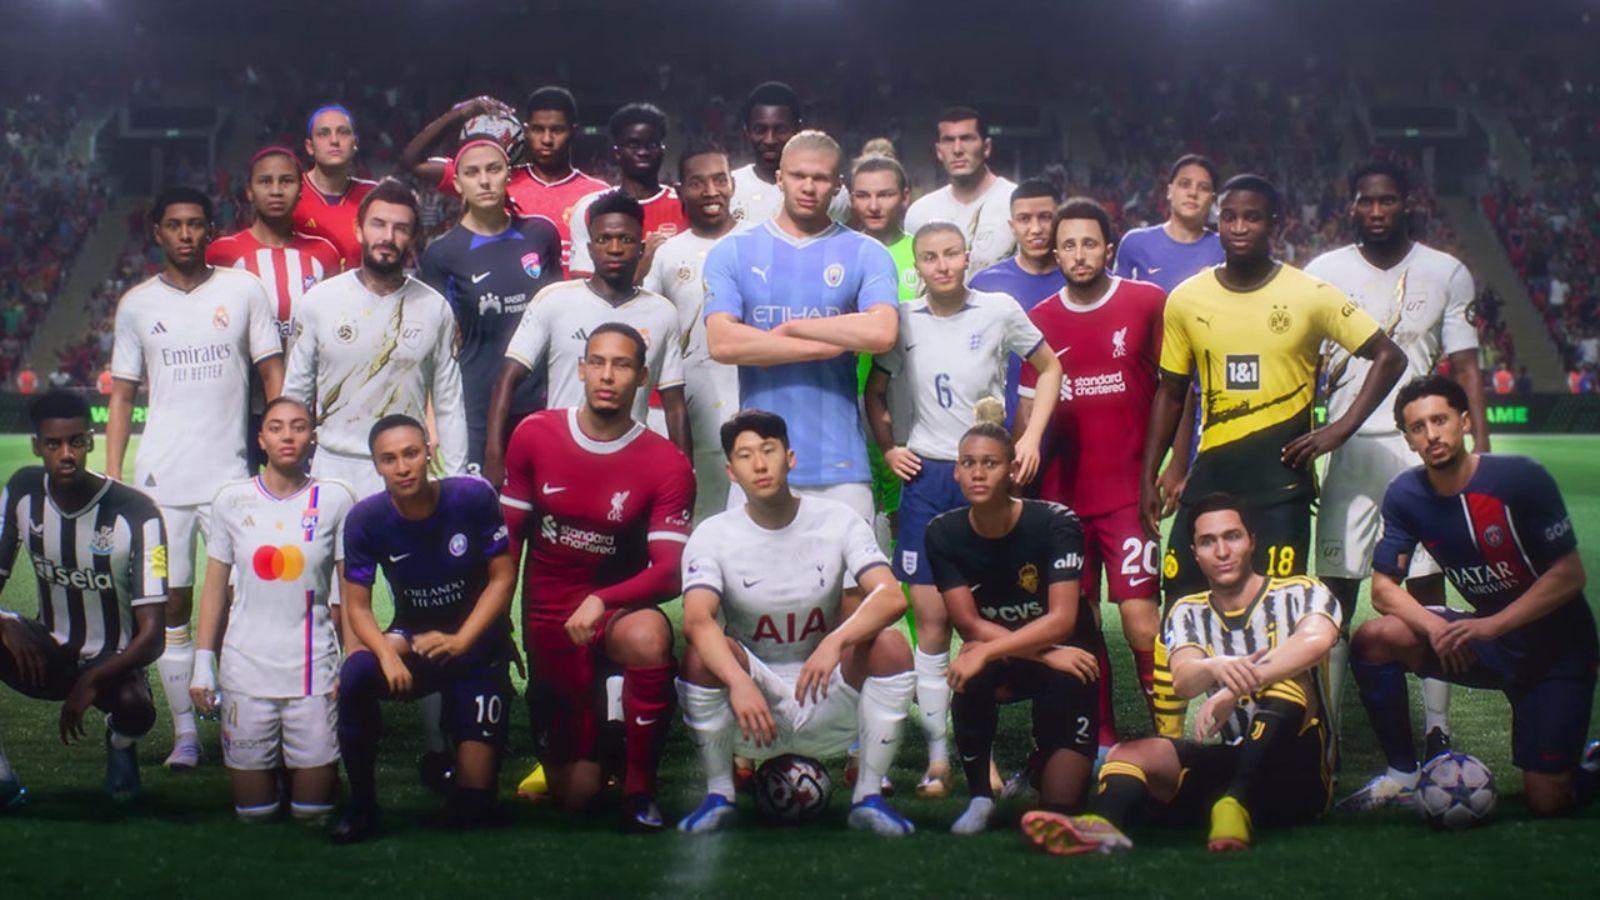 FIFA 23 Ultimate Edition cover stars revealed - Charlie INTEL